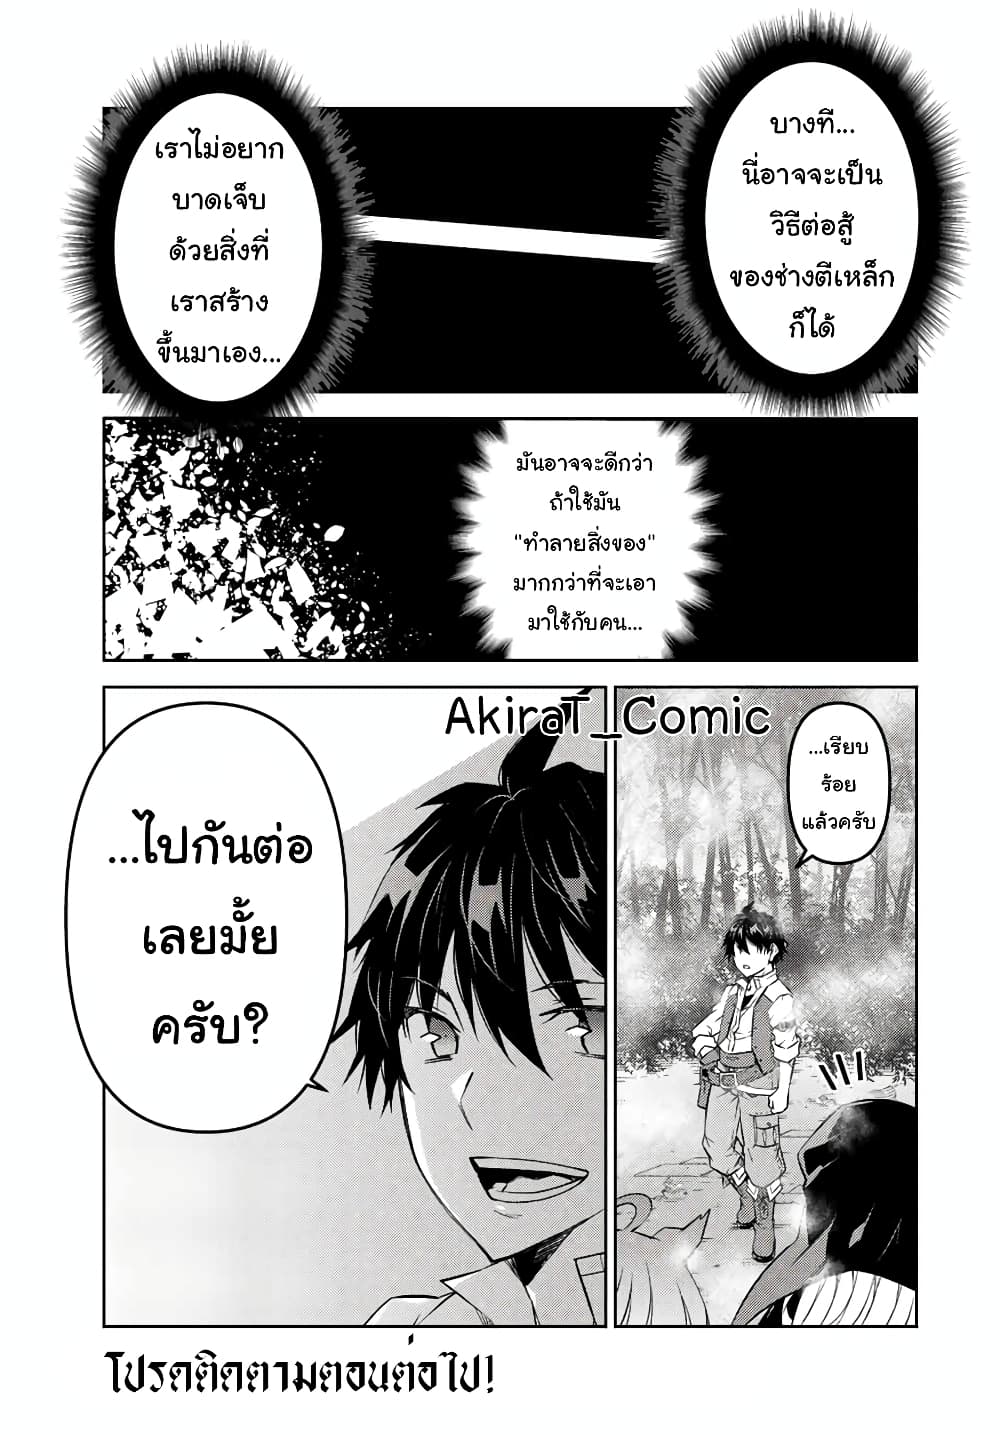 The Weakest Occupation "Blacksmith", but It's Actually the Strongest ช่างตีเหล็กอาชีพกระจอก? 88-88